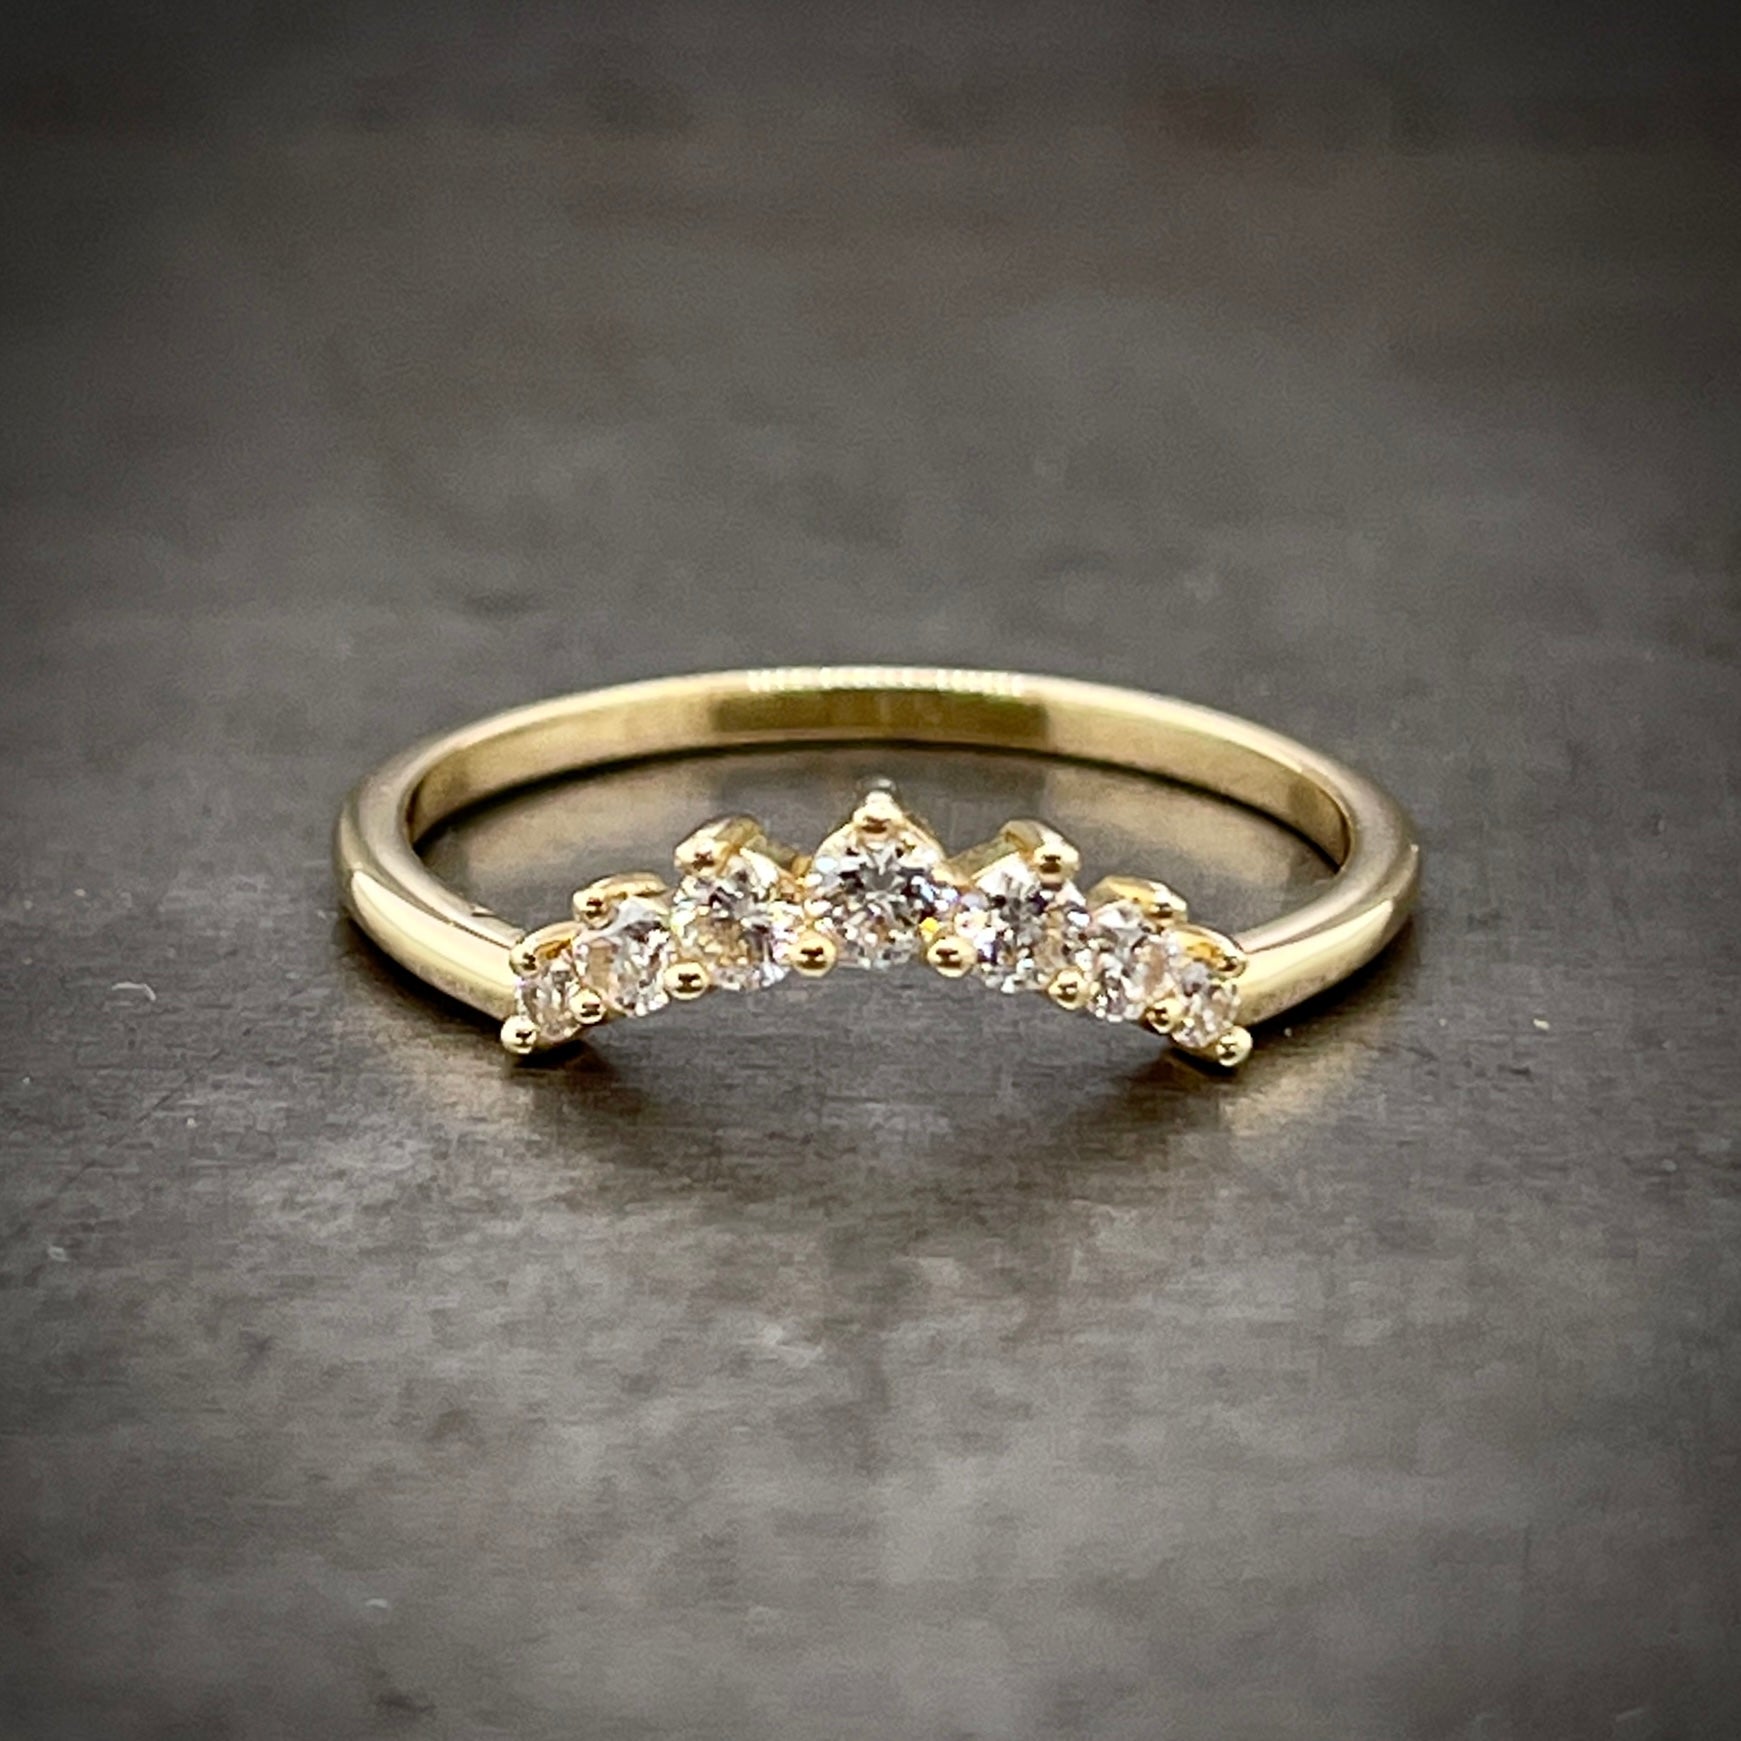 Frontal vie of diamond tiara crown. This ring features seven diamond that create the shape of the curve of a tiara and decrease in size the further down it goes. Lays on a gold band.